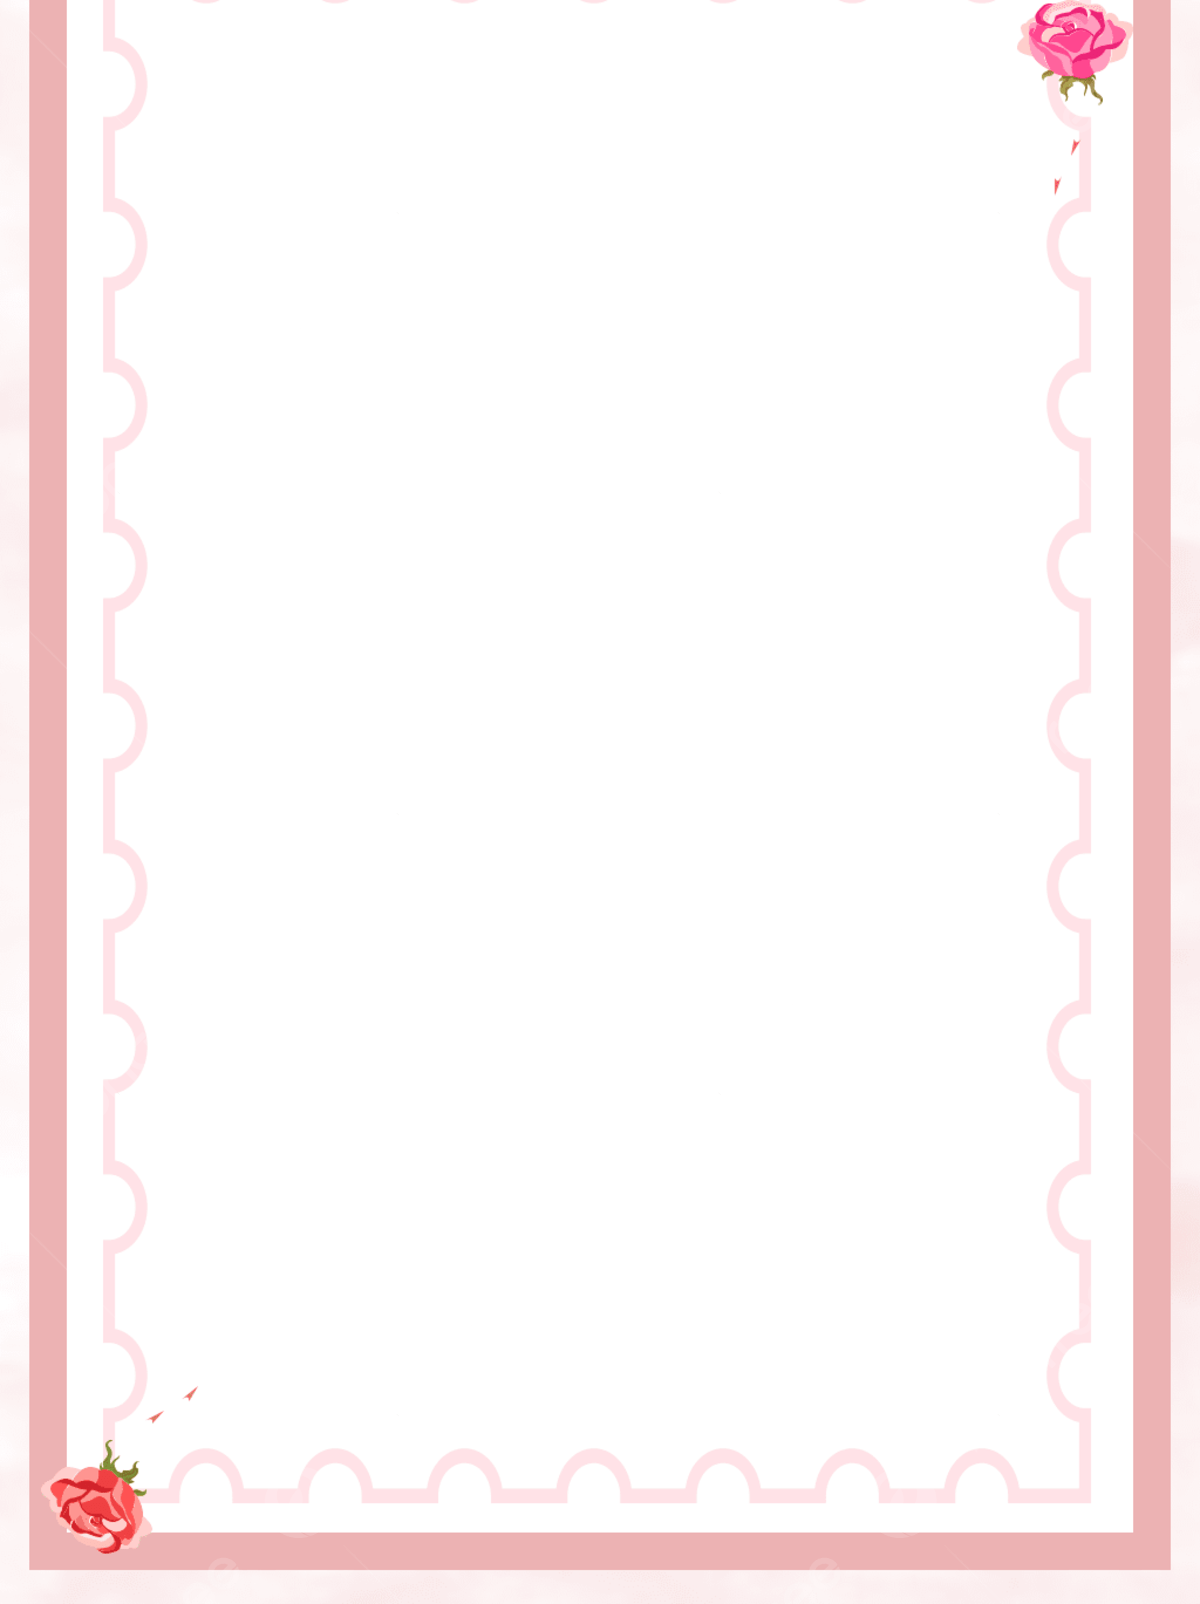 A border featuring pink roses and a pink scalloped border. - Border